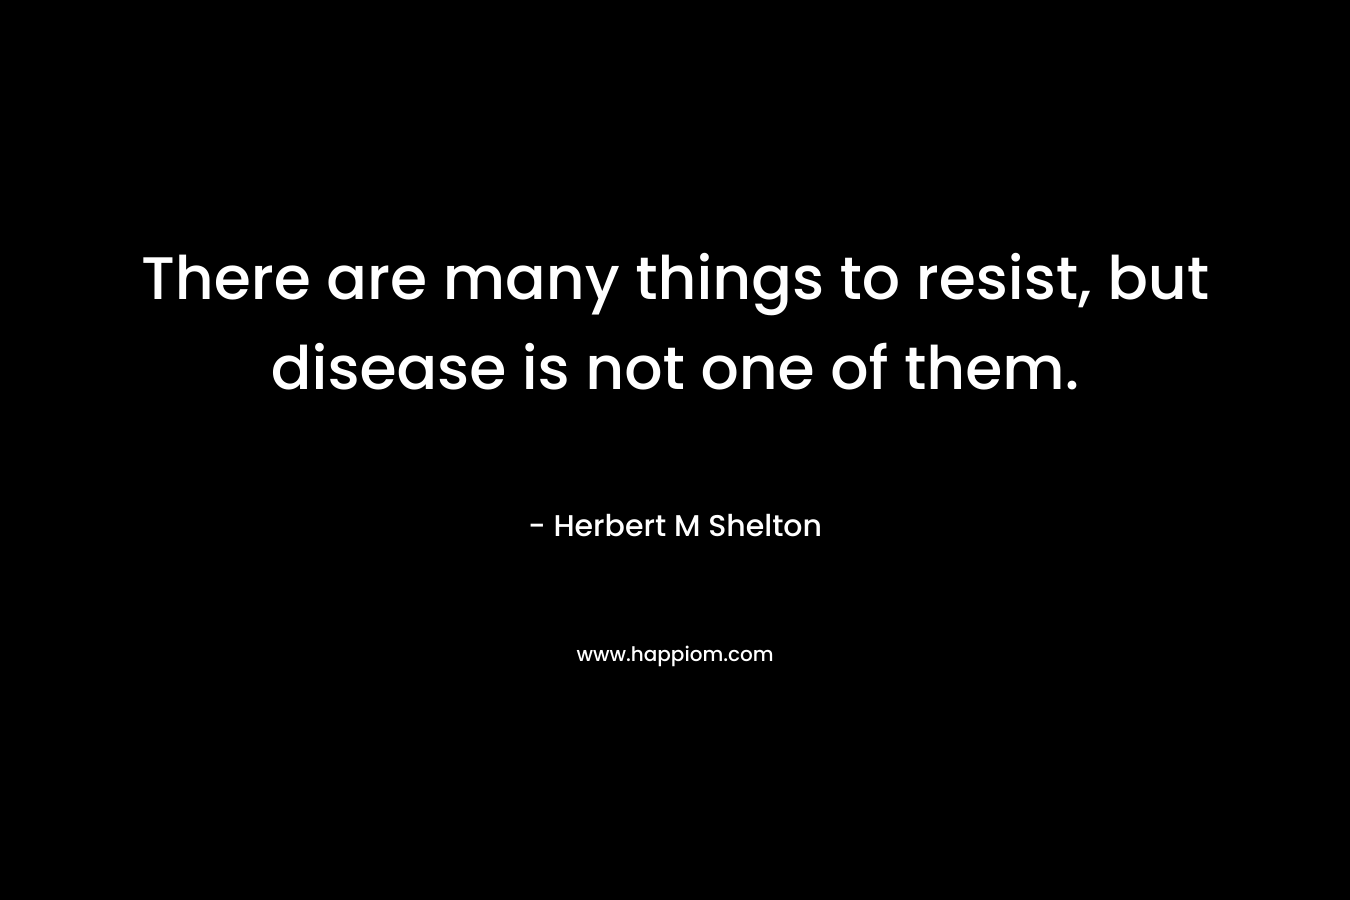 There are many things to resist, but disease is not one of them.